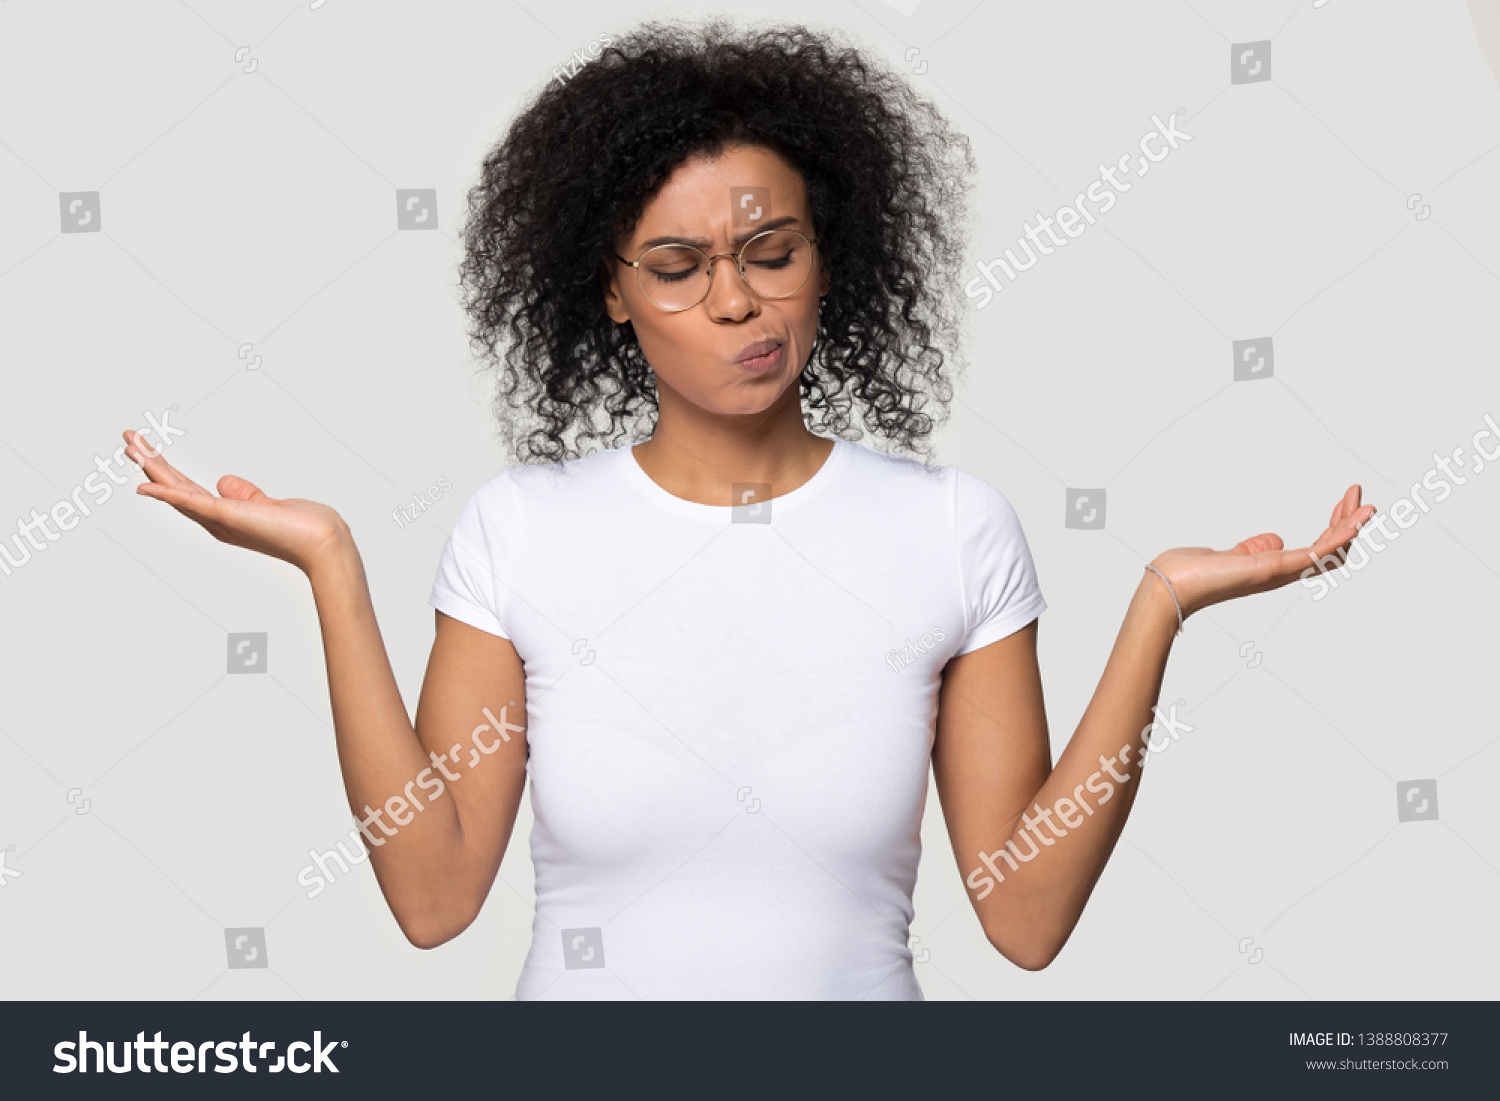 African thoughtful woman in glasses white t-shirt stretched hands imagining alternatives weighs pros and cons isolated on grey blank background, concept of make important decision and choosing option #1388808377